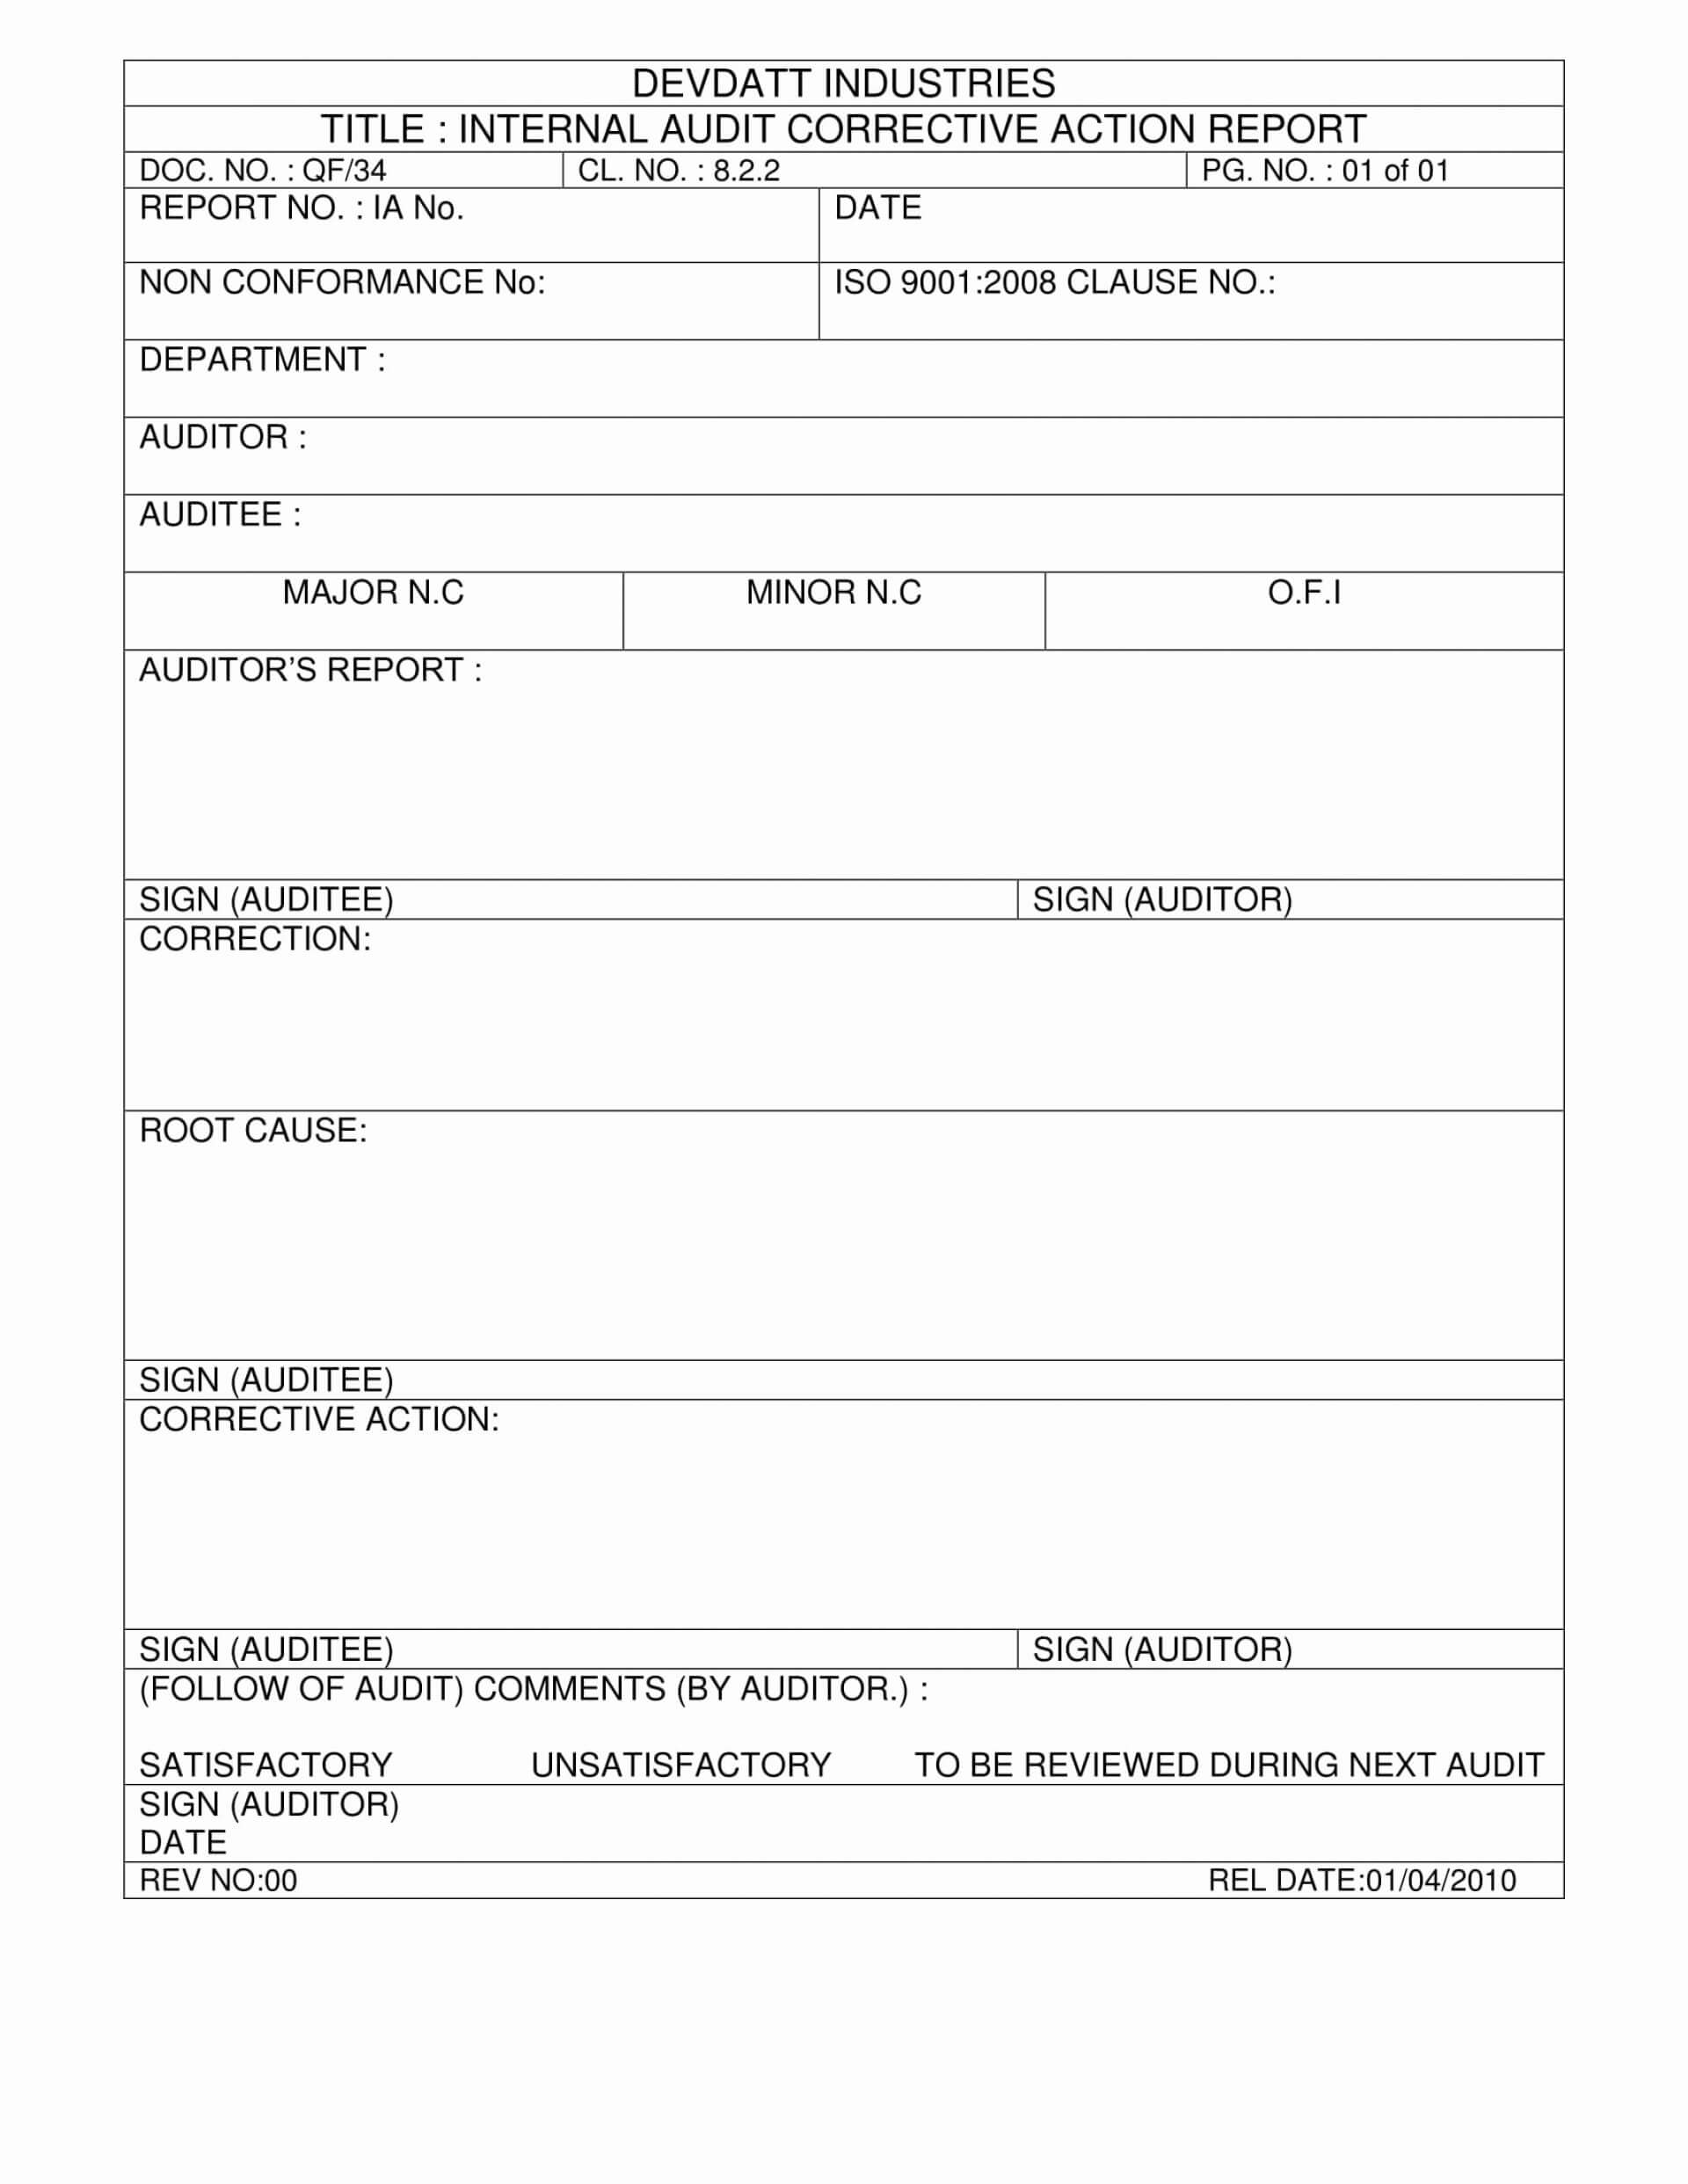 014 Corrective Action Form Template Word Ideas New Non For Non Conformance Report Form Template